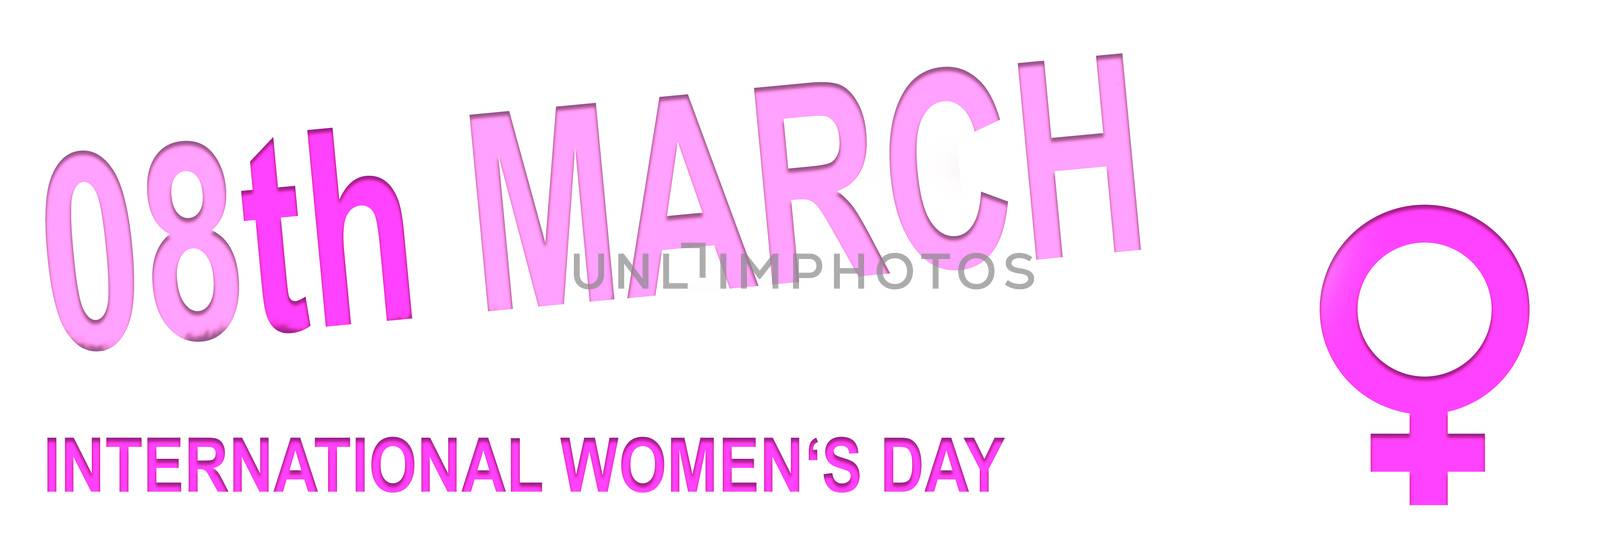 Pink illustration panorama card with women's sign and text 08 March International Women's Day